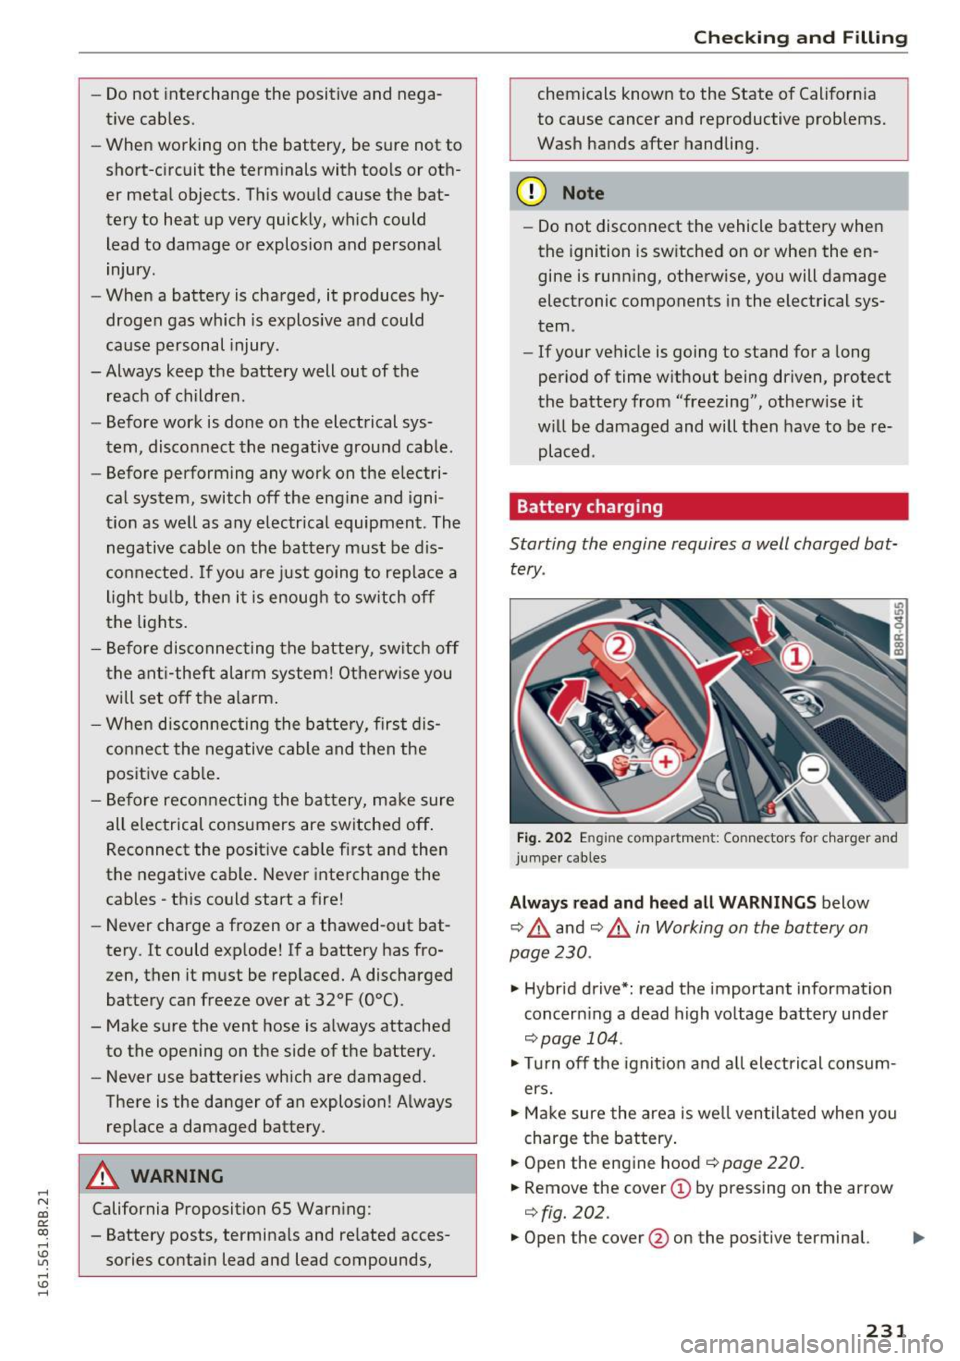 AUDI Q5 2016  Owners Manual ..... N 
co ~ CX) 
..... I.Cl U"I 
..... I.Cl ..... 
-Do not  interchange  the  positive  a nd  nega­
tive  cables. 
- When  working  on  the  battery,  be  sure  not  to 
short-circuit  the  termina